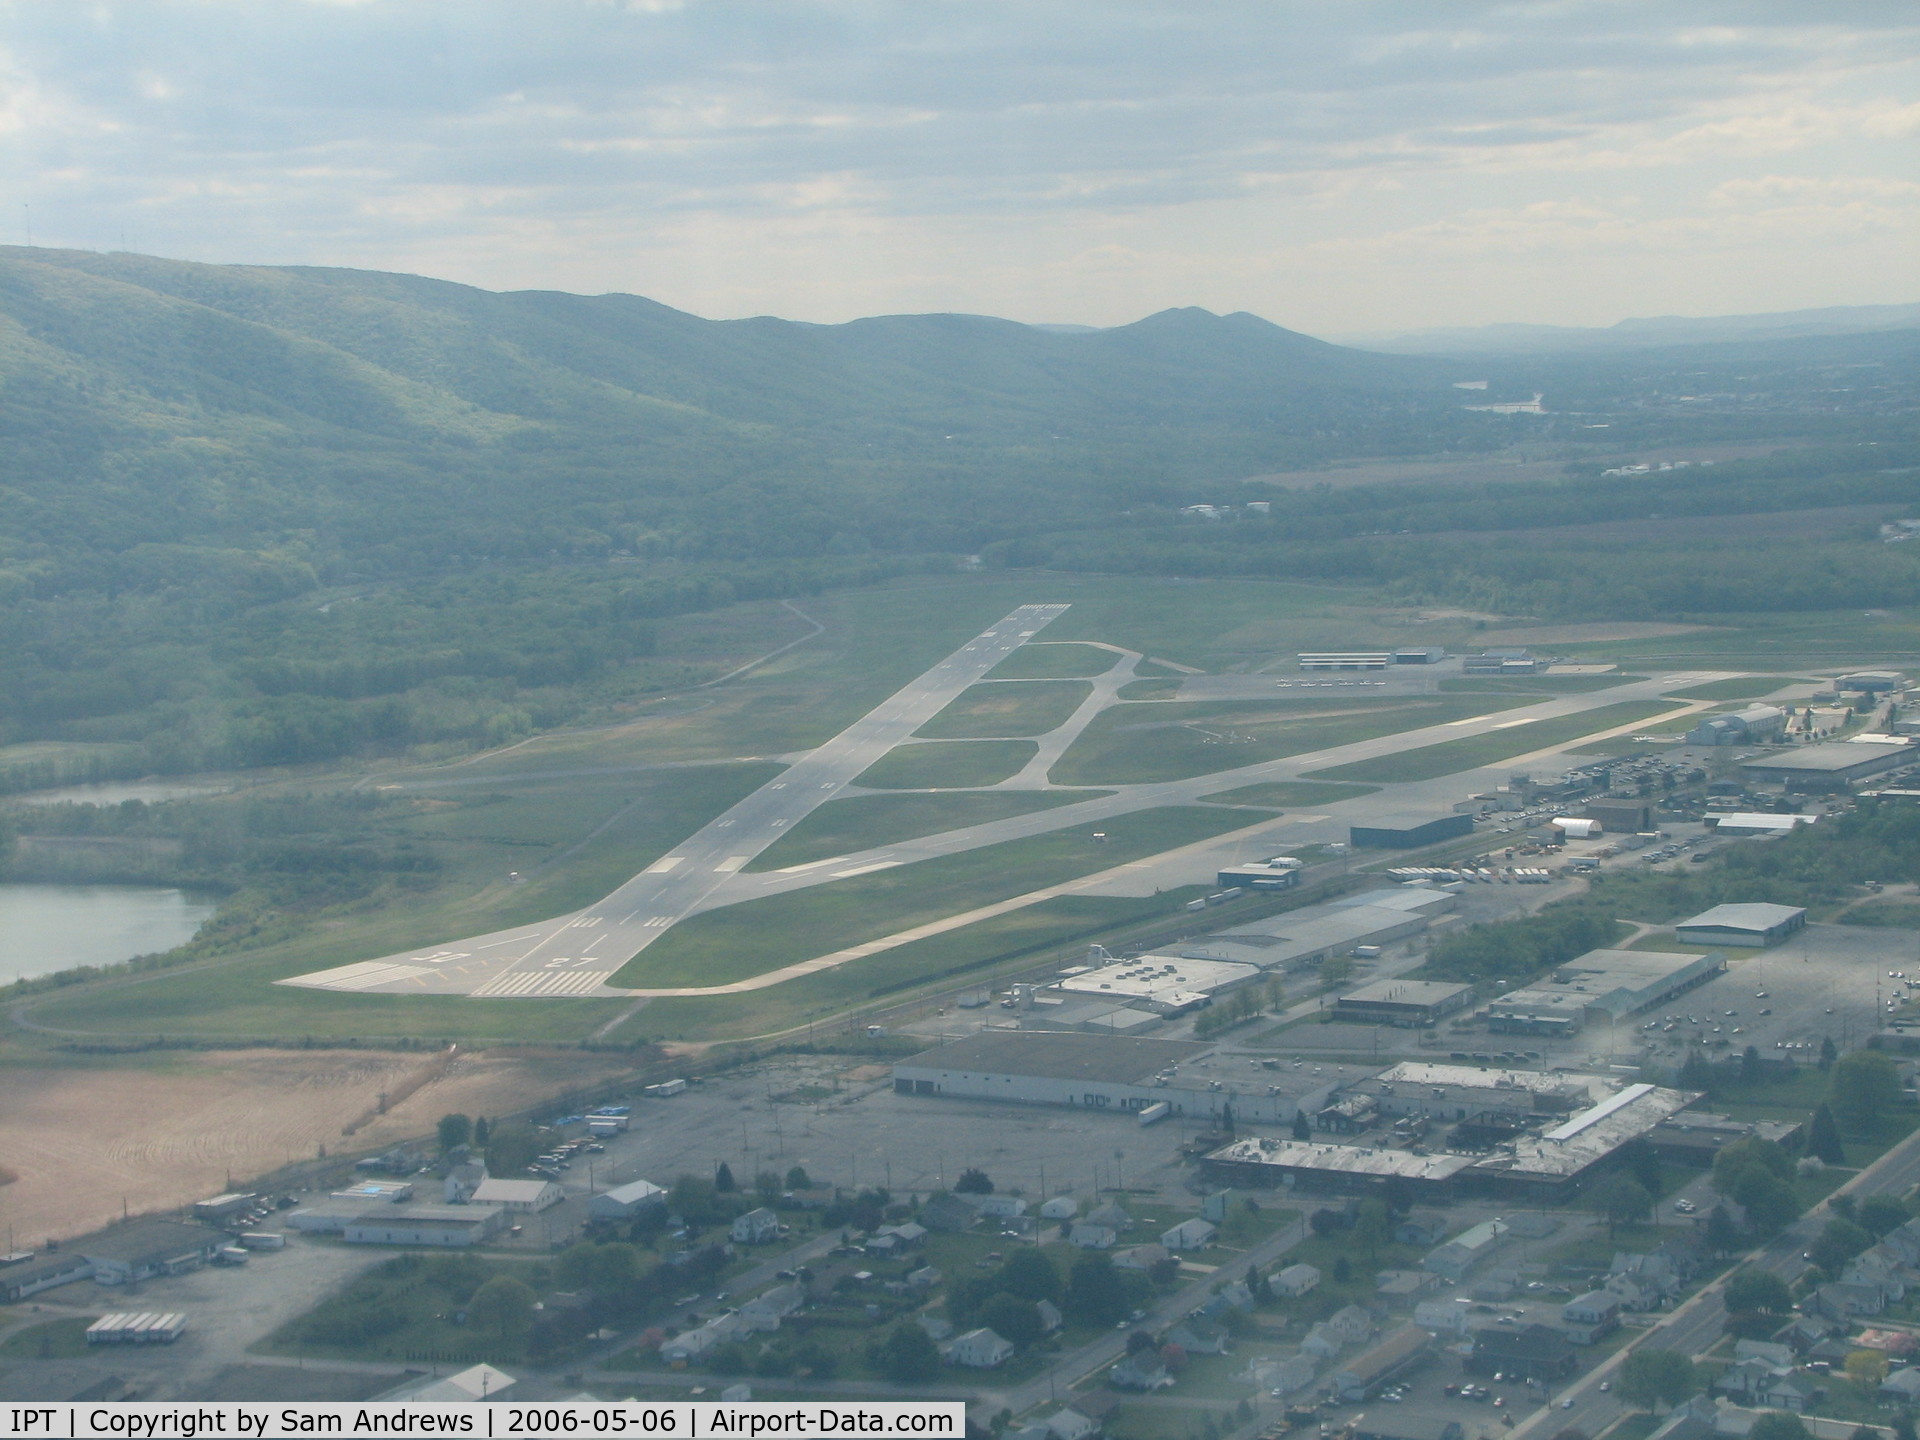 Williamsport Regional Airport (IPT) - Nice shot down the bald eagle ridge looking west on approach to rwy 27